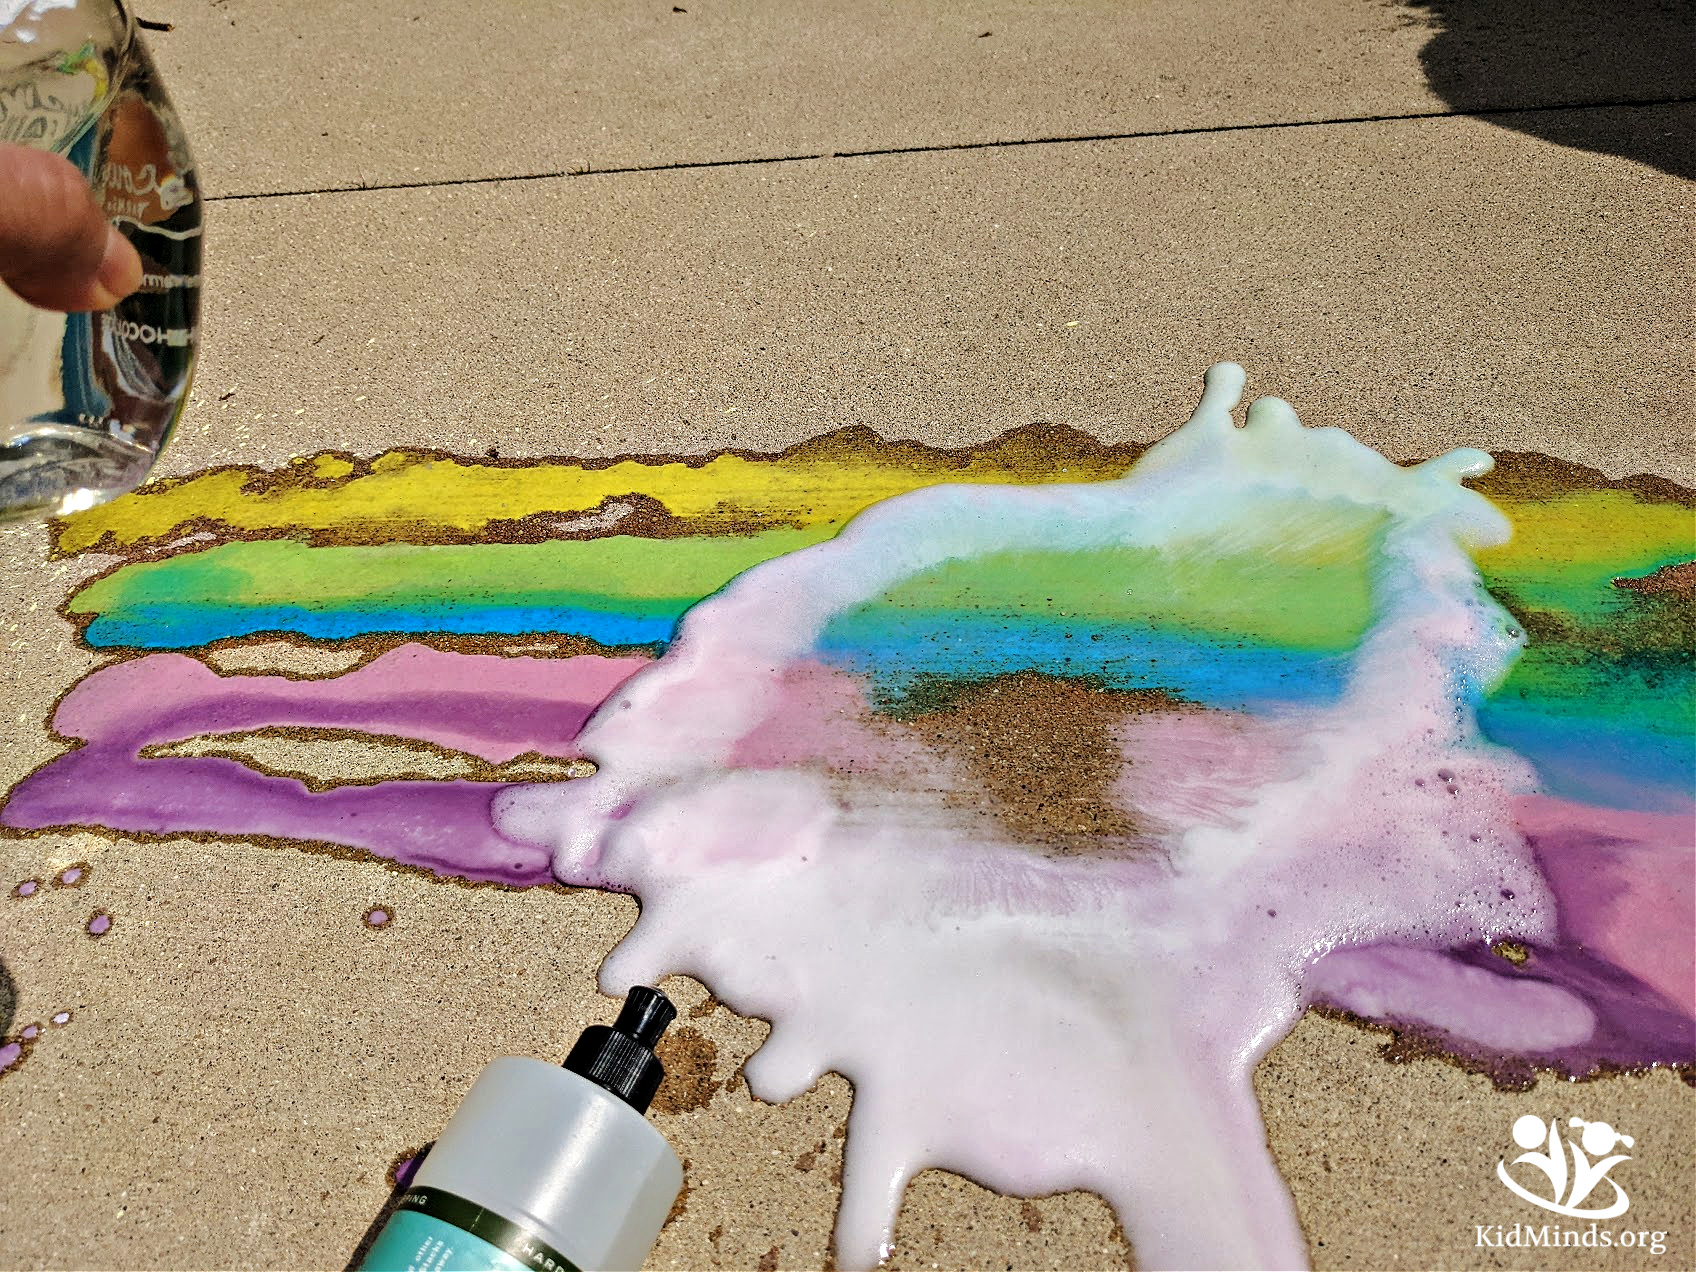 Ready in just five minutes, this fizzy sidewalk paint recipe is a super fun way to spend time outside and learn some science. #kidsactivities #summer #kidminds #learningideas #STEAM